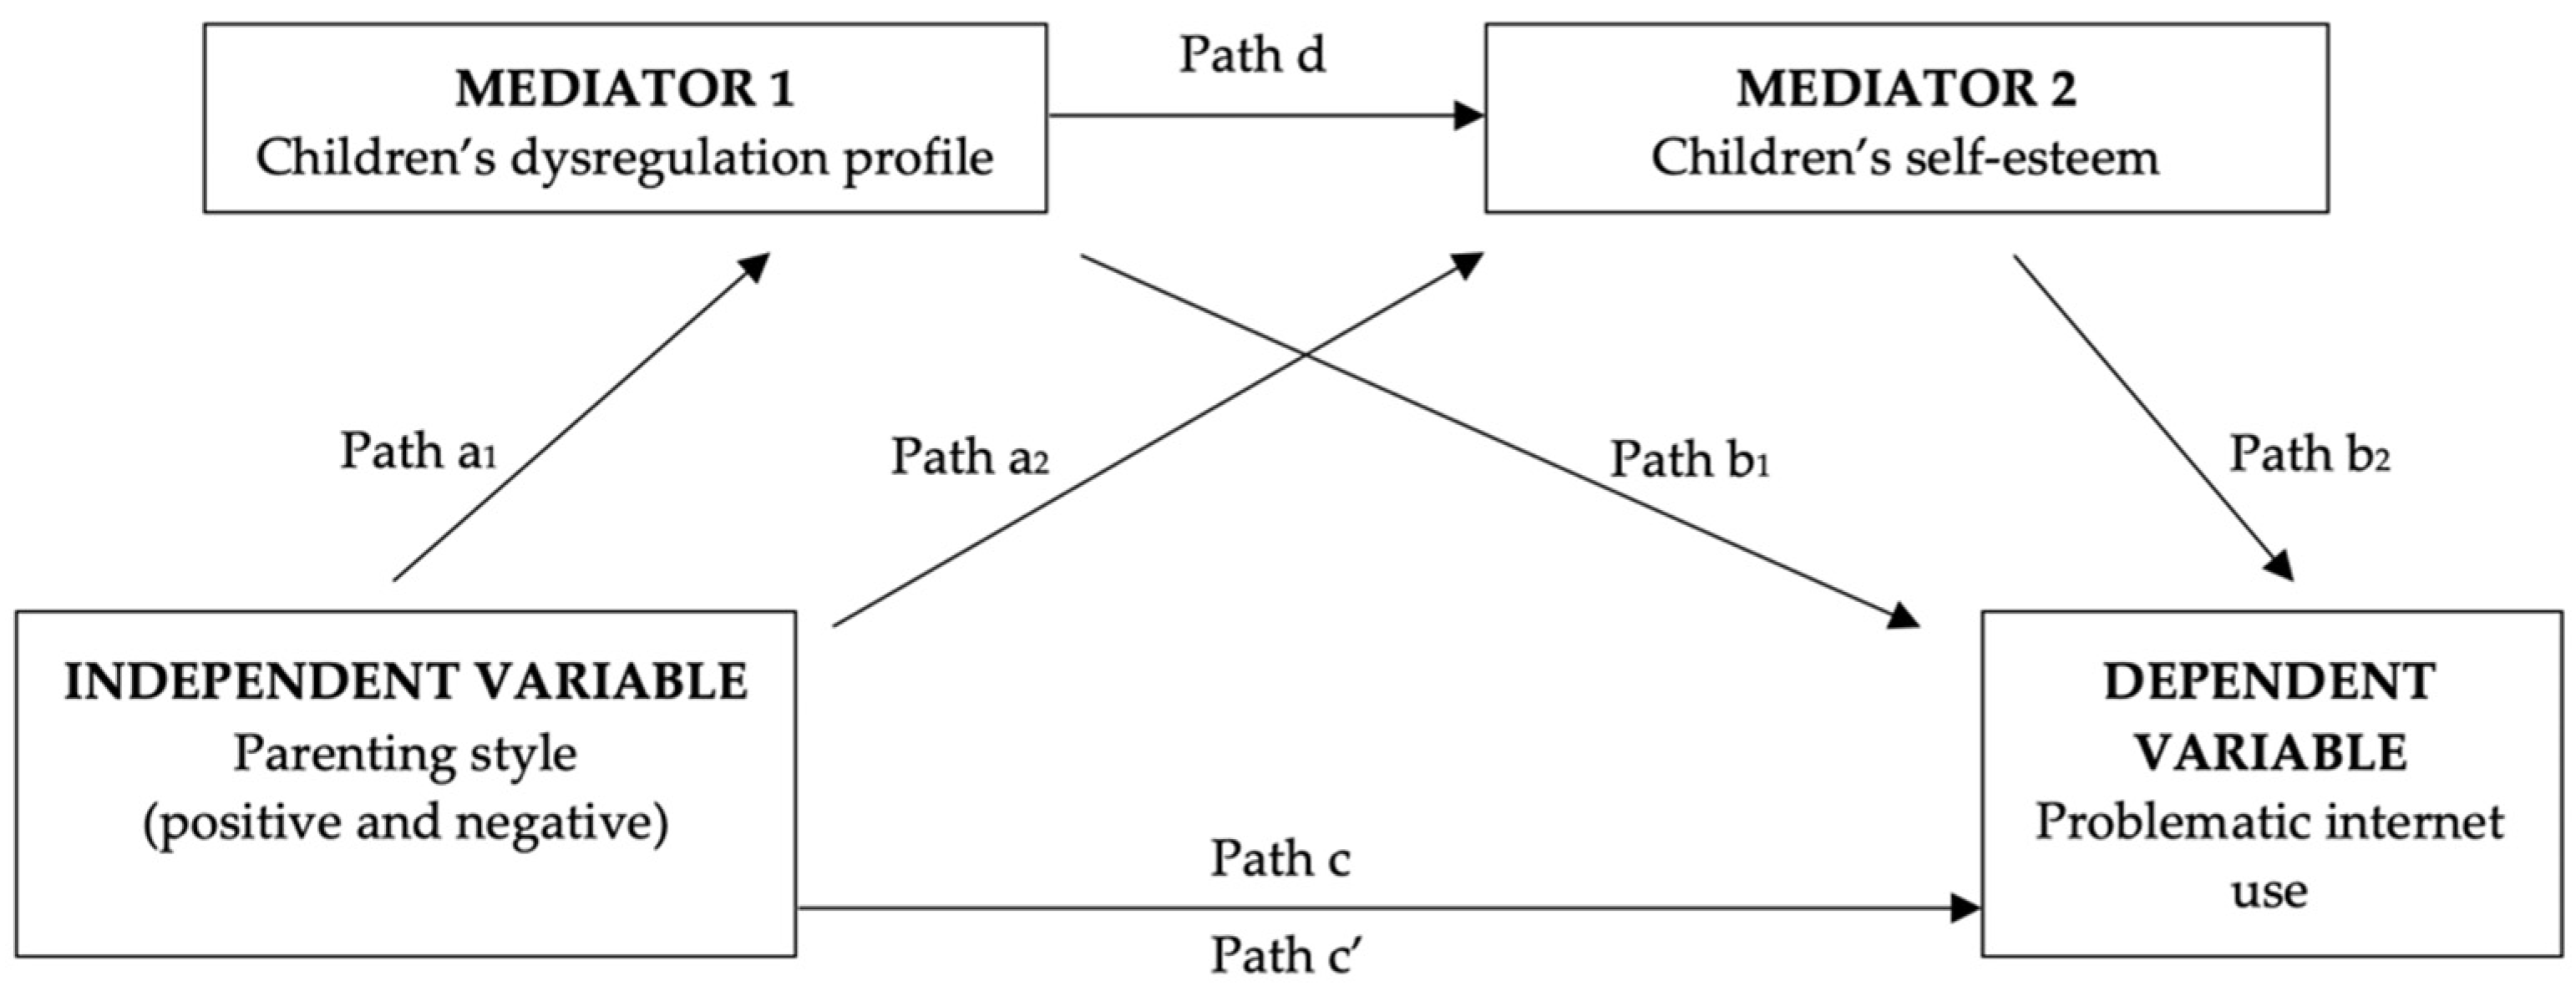 IJERPH | Free Full-Text | The Role of Parenting, Dysregulation and  Self-Esteem in Adolescents’ Problematic Social Network Site Use: A  Test of Parallel and Serial Mediation Models in a Healthy Community Sample